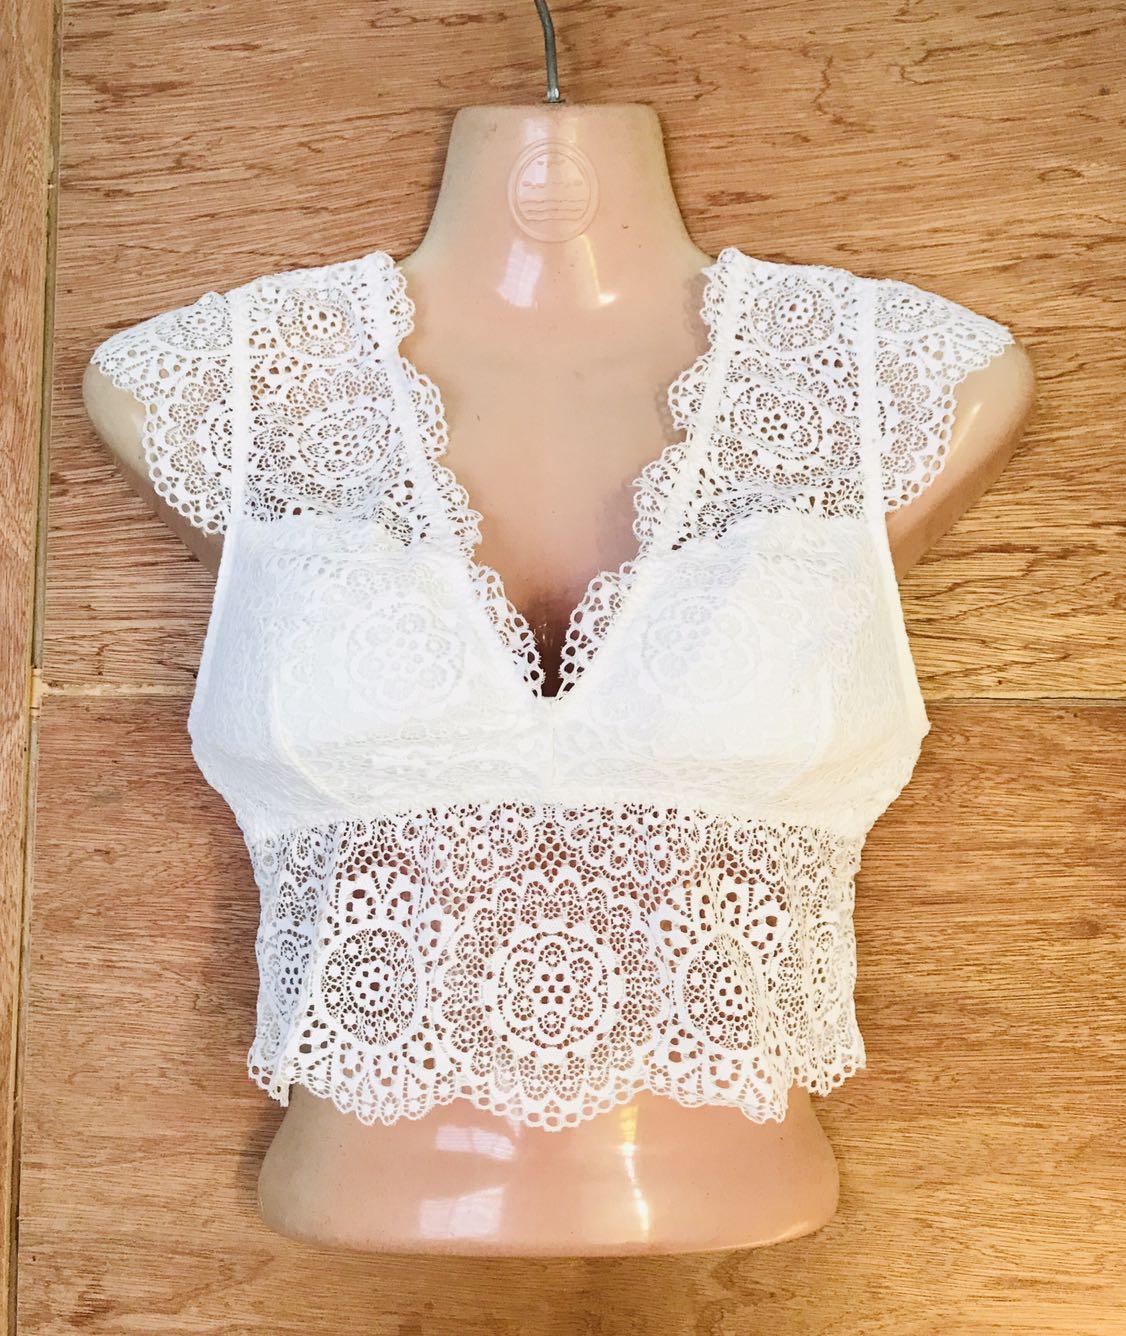 Gilly Hicks Hollister White Crochet Lace Cap-Sleeve Bralette Size M